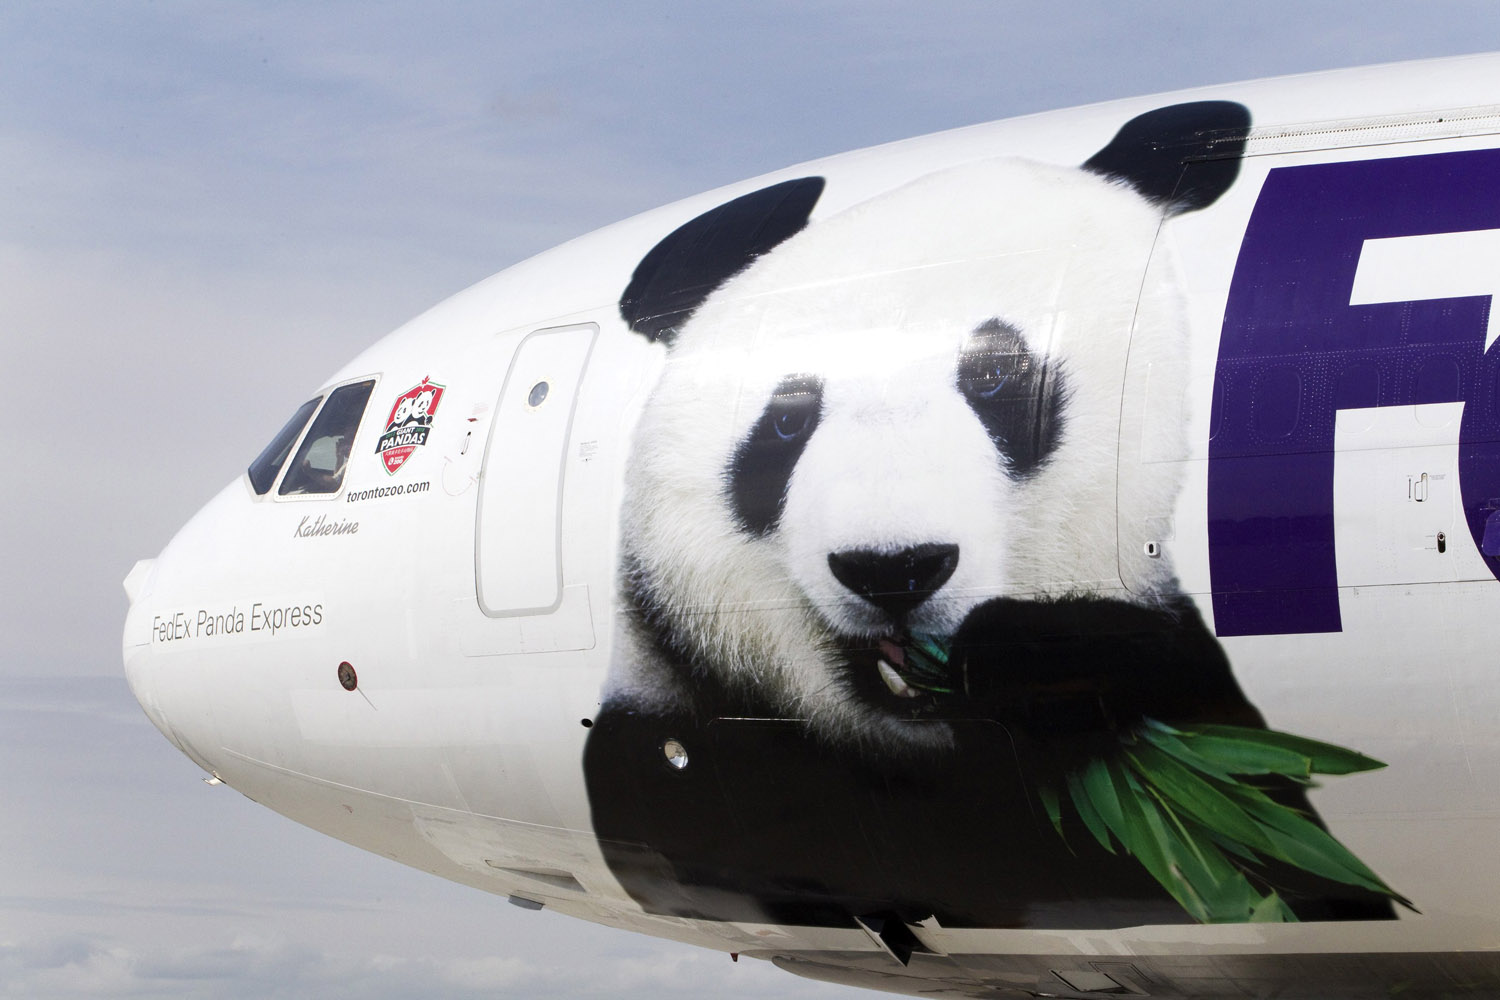 March 25, 2013. A Federal Express aircraft carrying two panda bears arrives at Pearson International airport in Toronto. The two bears are on loan to Canada from China for 10 years. They will spend the first five years at the Metro Toronto Zoo after which they will be moved to Calgary, Alberta, for the remaining five years of their visit.